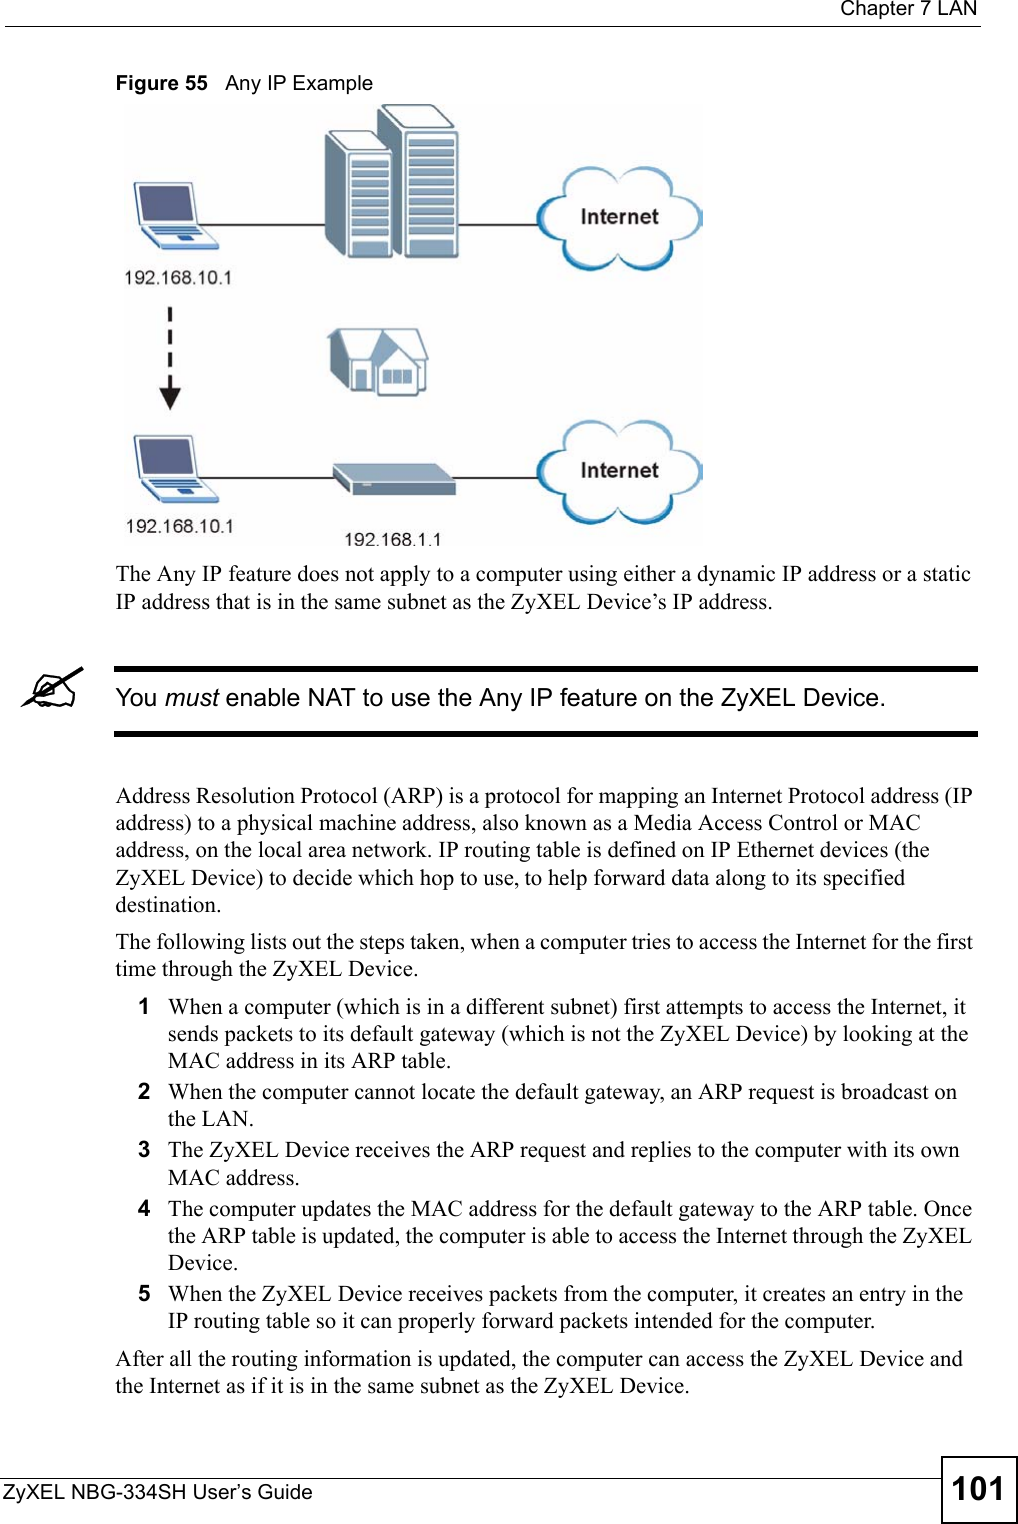  Chapter 7 LANZyXEL NBG-334SH User’s Guide 101Figure 55   Any IP ExampleThe Any IP feature does not apply to a computer using either a dynamic IP address or a static IP address that is in the same subnet as the ZyXEL Device’s IP address.&quot;You must enable NAT to use the Any IP feature on the ZyXEL Device. Address Resolution Protocol (ARP) is a protocol for mapping an Internet Protocol address (IP address) to a physical machine address, also known as a Media Access Control or MAC address, on the local area network. IP routing table is defined on IP Ethernet devices (the ZyXEL Device) to decide which hop to use, to help forward data along to its specified destination.The following lists out the steps taken, when a computer tries to access the Internet for the first time through the ZyXEL Device.1When a computer (which is in a different subnet) first attempts to access the Internet, it sends packets to its default gateway (which is not the ZyXEL Device) by looking at the MAC address in its ARP table. 2When the computer cannot locate the default gateway, an ARP request is broadcast on the LAN. 3The ZyXEL Device receives the ARP request and replies to the computer with its own MAC address. 4The computer updates the MAC address for the default gateway to the ARP table. Once the ARP table is updated, the computer is able to access the Internet through the ZyXEL Device. 5When the ZyXEL Device receives packets from the computer, it creates an entry in the IP routing table so it can properly forward packets intended for the computer. After all the routing information is updated, the computer can access the ZyXEL Device and the Internet as if it is in the same subnet as the ZyXEL Device. 